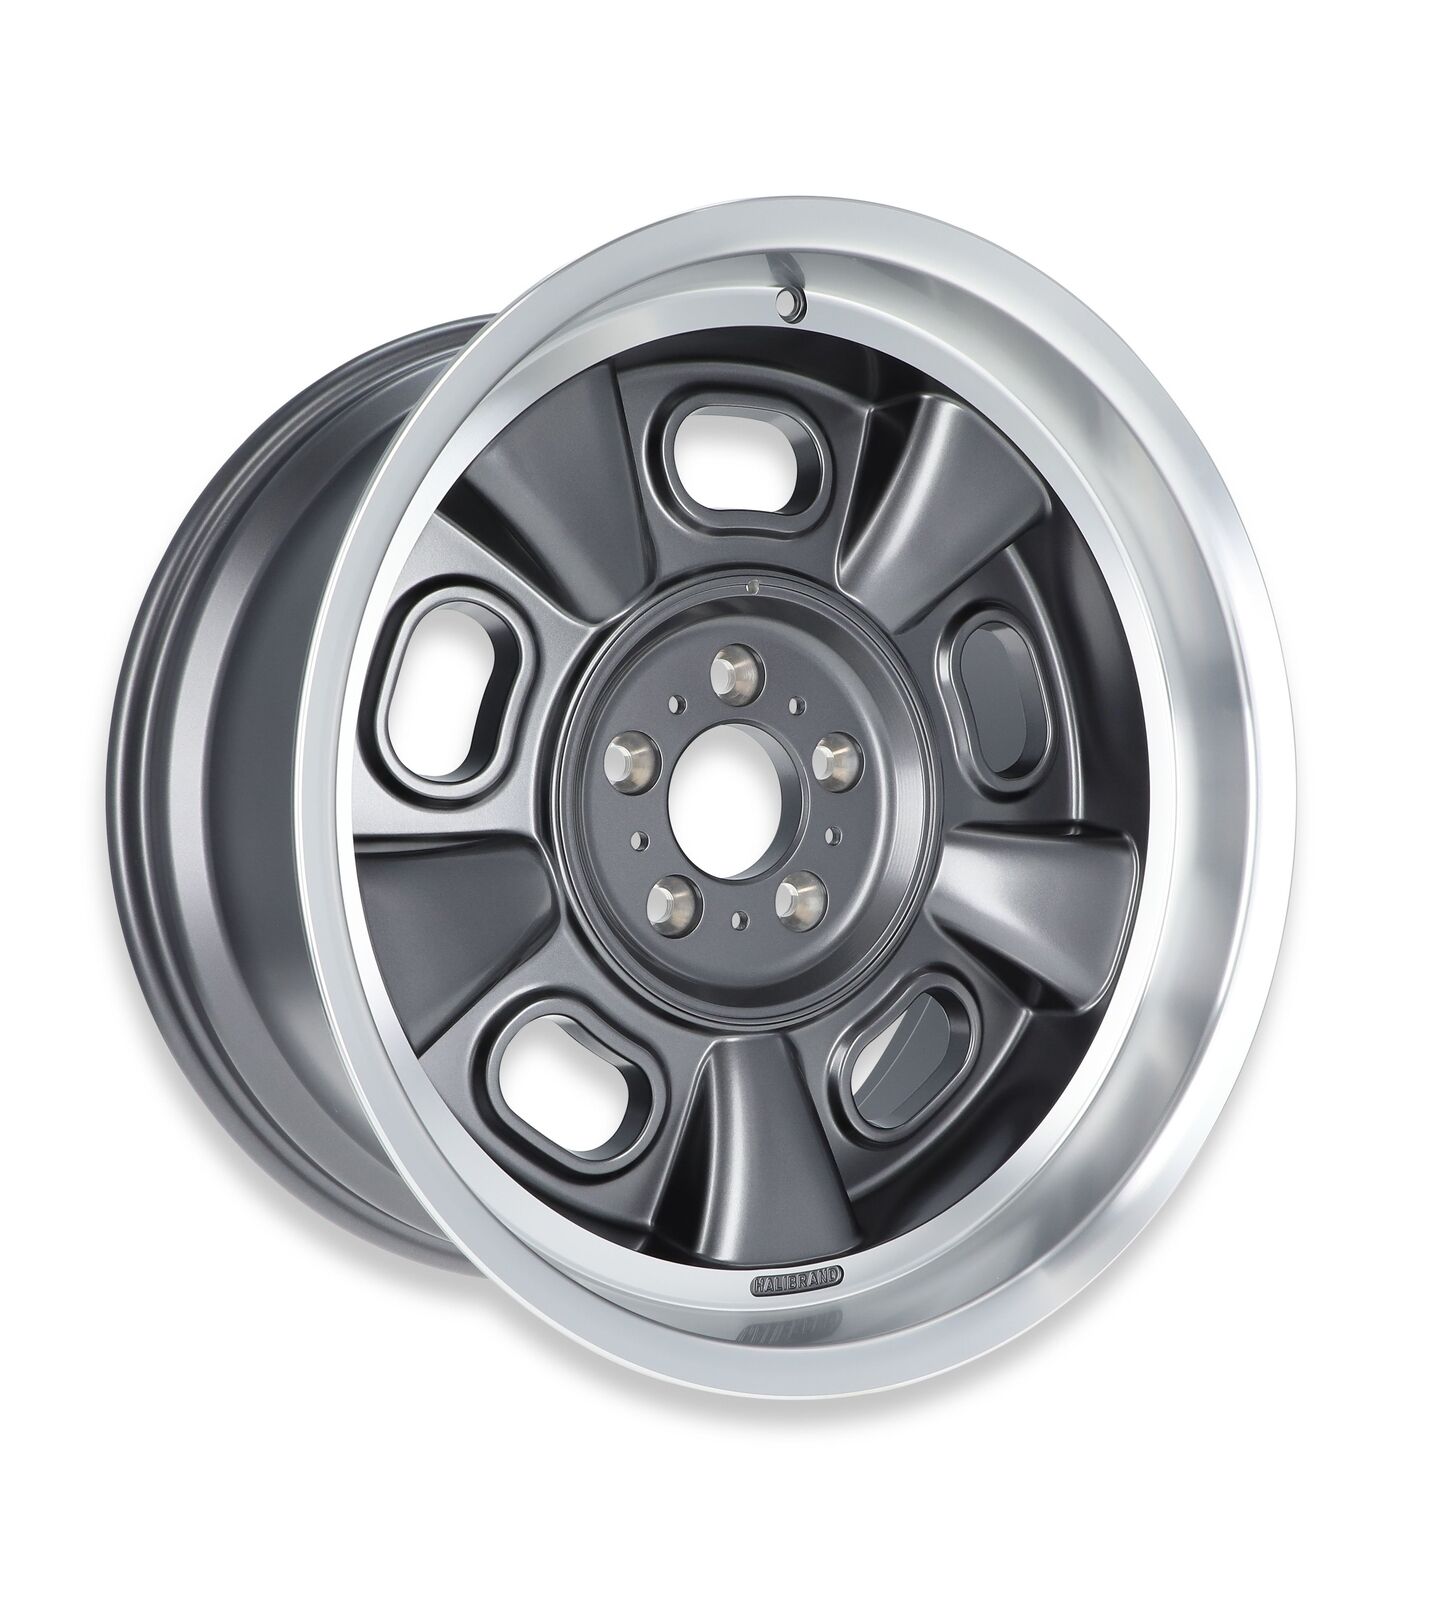 Halibrand HB002-006 Indy Roadster Wheel 20x10 - 5.5 bs Anthracite Semi Gloss